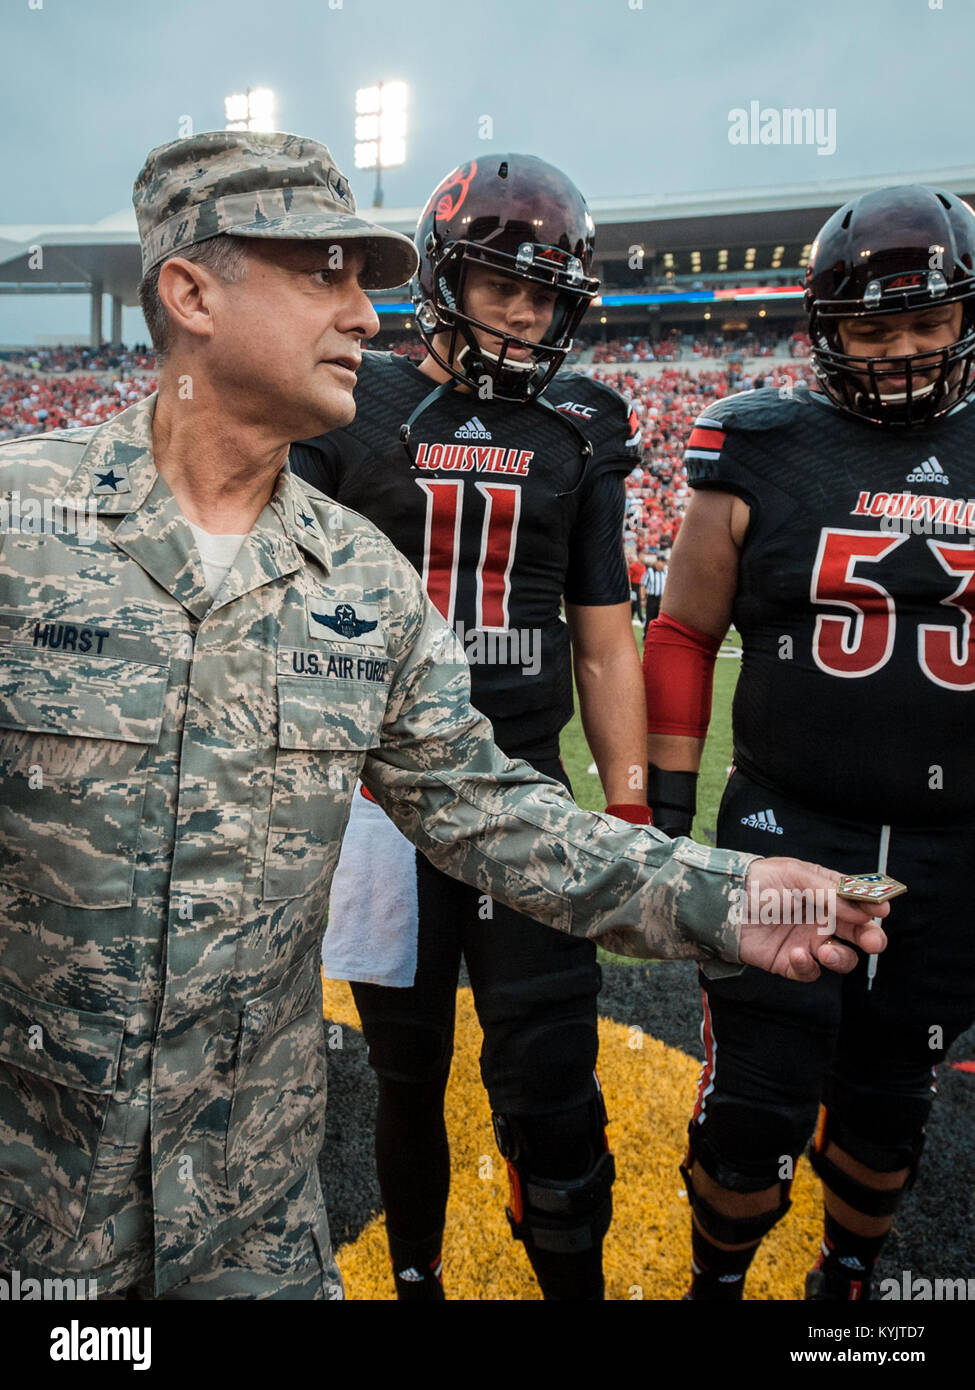 Air Force Brig. Gen. Warren Hurst, the Kentucky National Guard's assistant adjutant general for Air and commander of the Kentucky Air National Guard, executes the coin toss at Papa John’s Cardinal Stadium in Louisville, Ky., to begin the University of Louisville – Murray State football game Sept. 6, 2014. The game was billed as Military Appreciation Day. (U.S. Air National Guard photo by Maj. Dale Greer/Released) Stock Photo